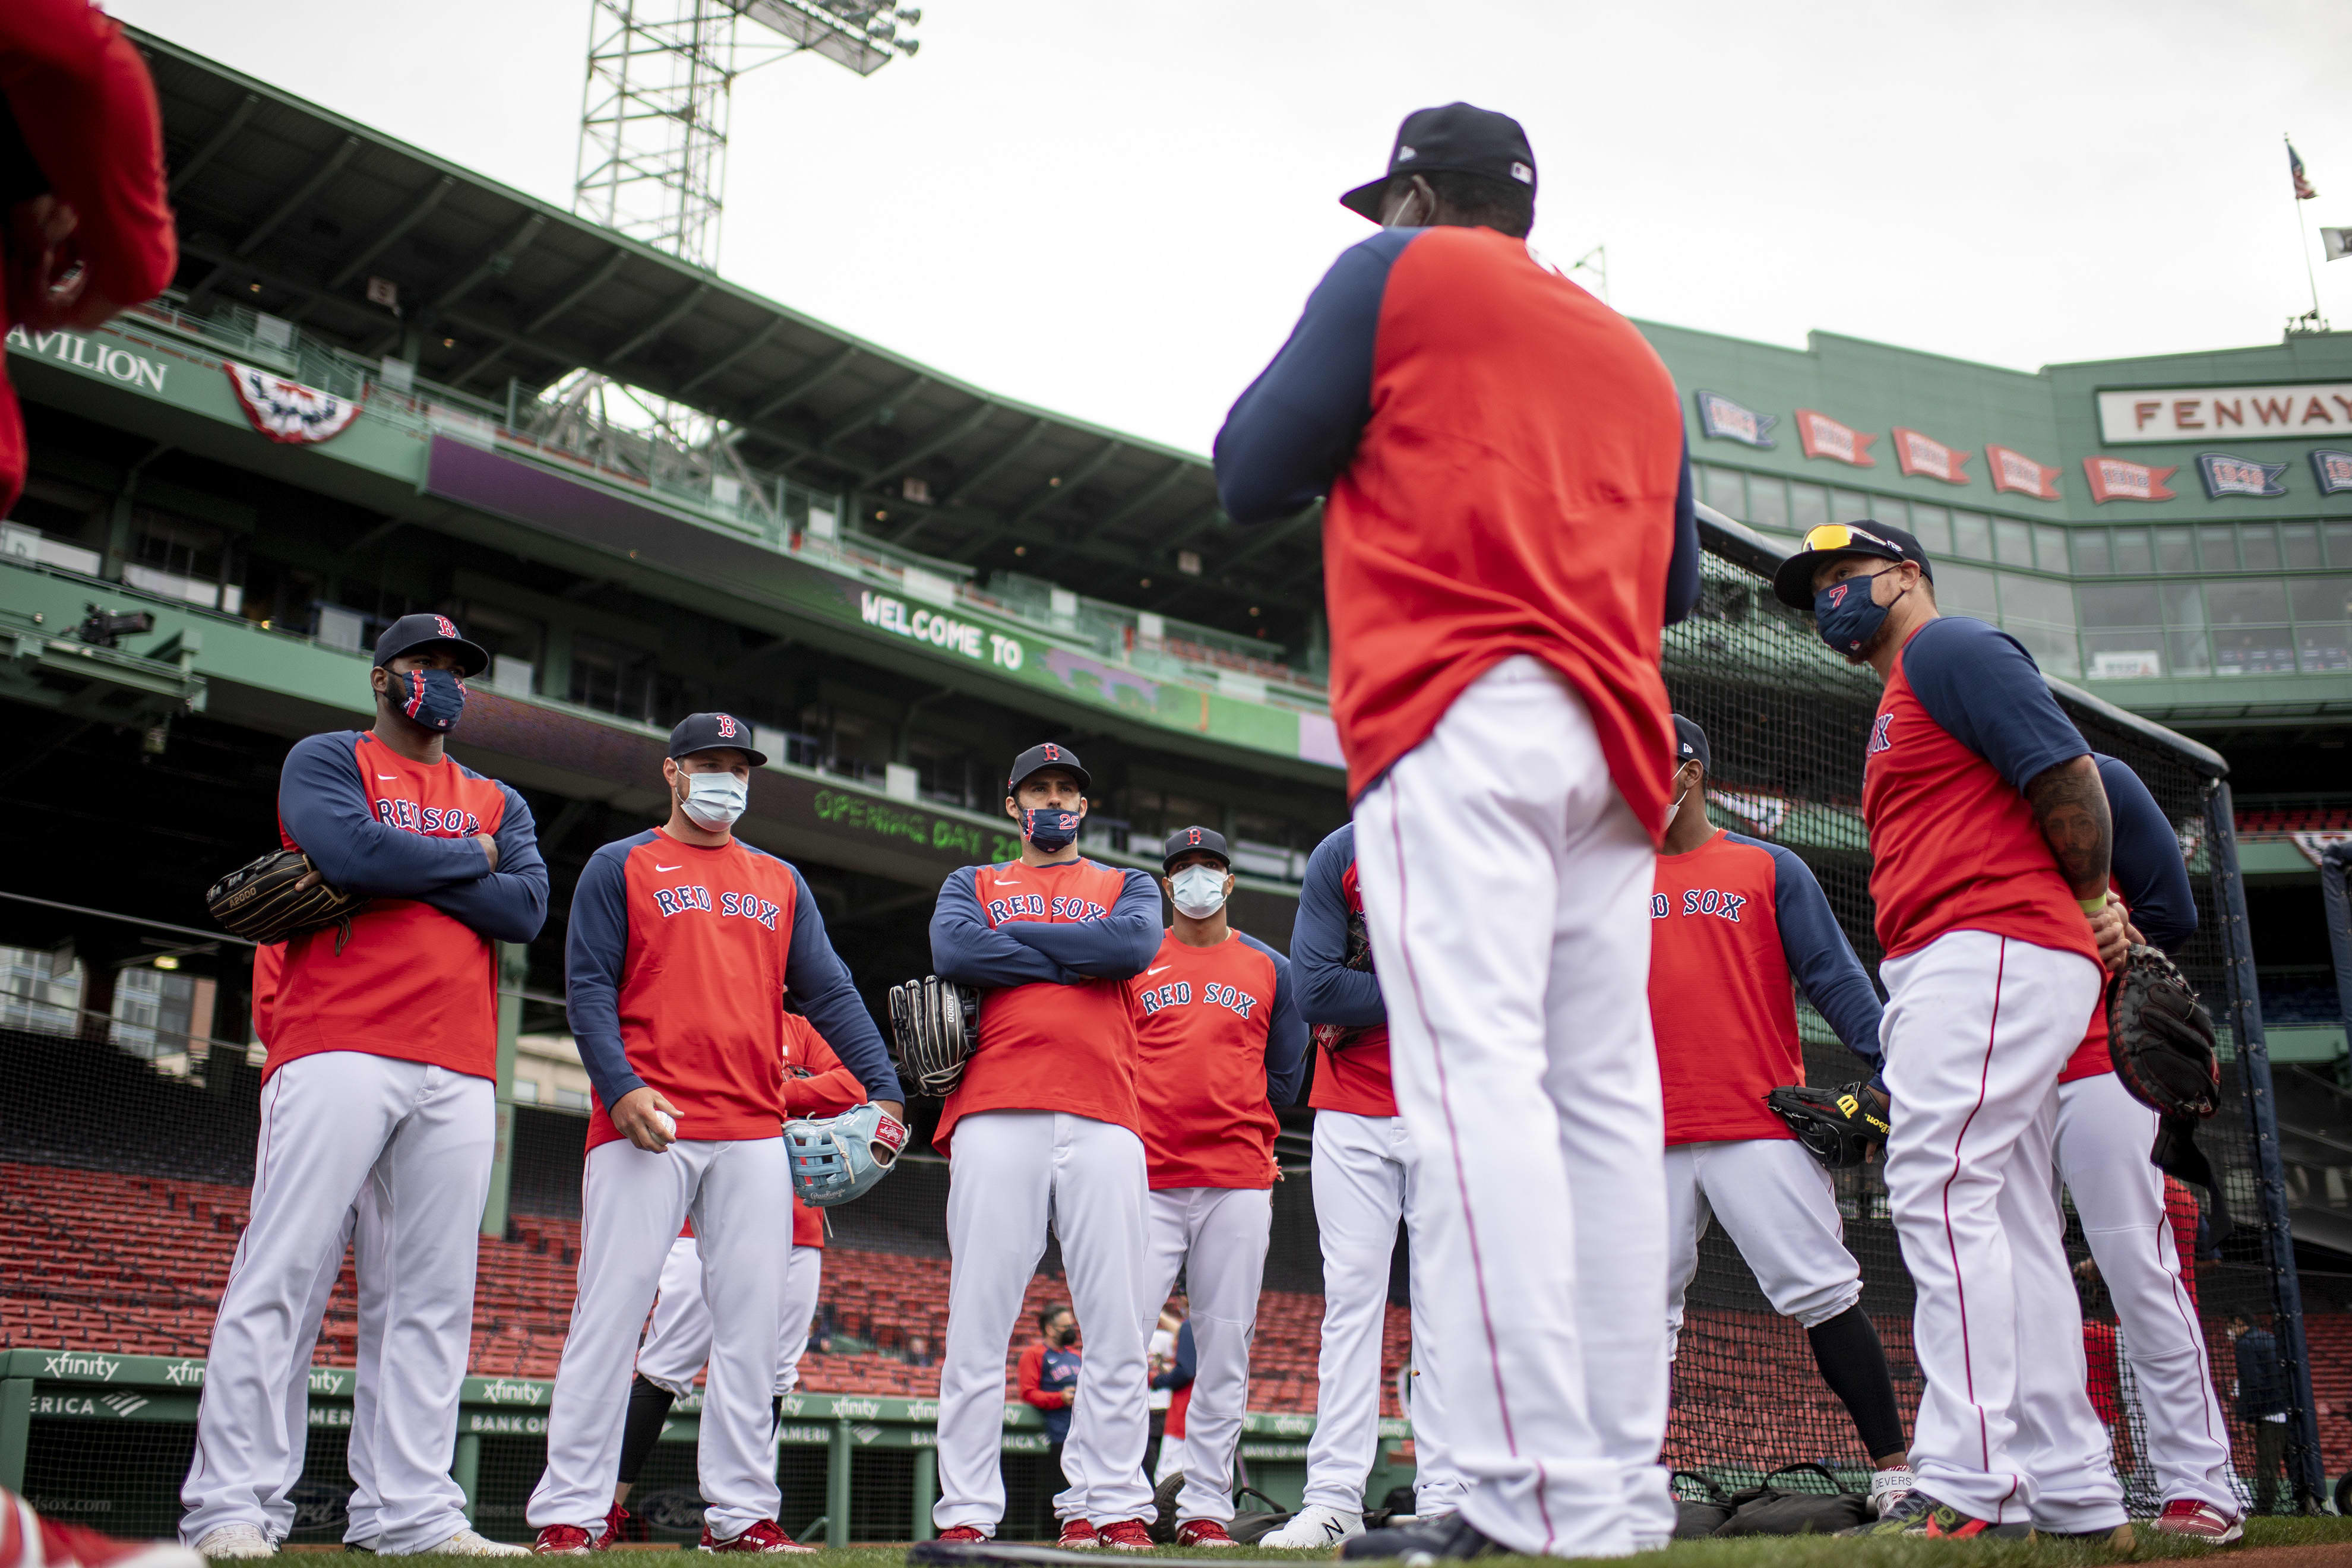 Boston Red Sox set Fenway Park carbon neutral goal with Aspiration link-up  - SportsPro